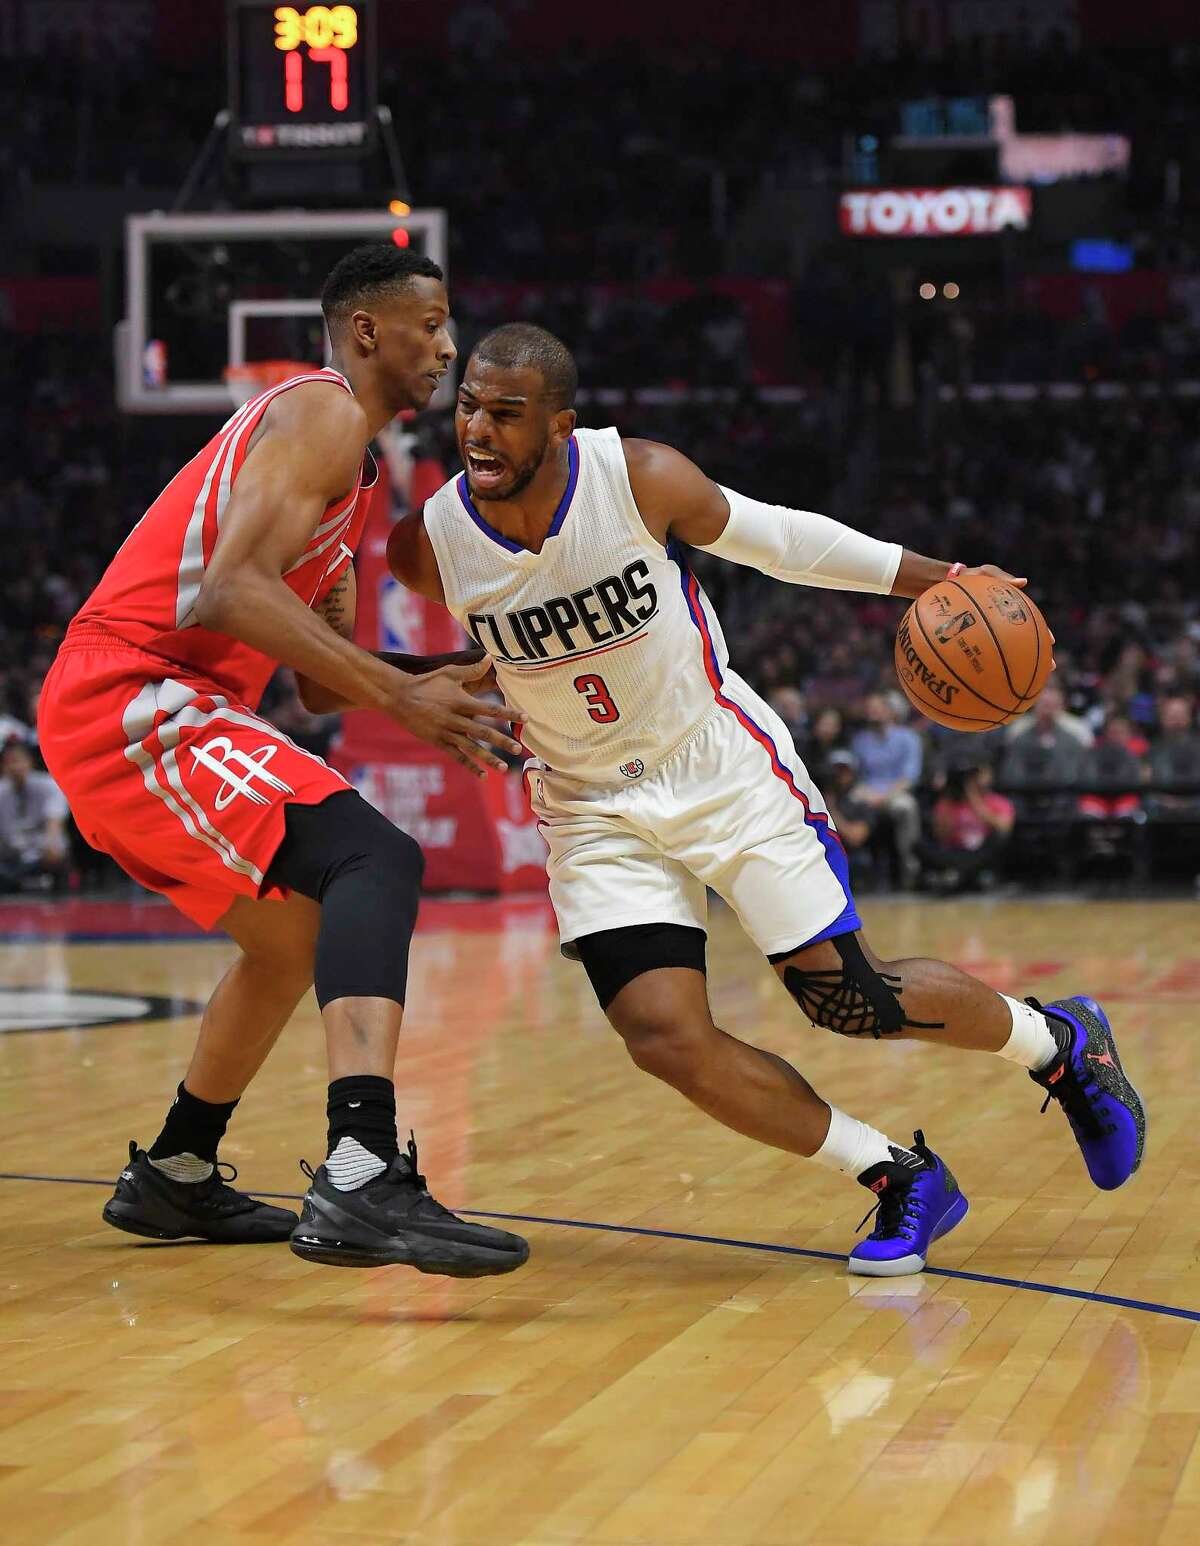 Los Angeles Clippers guard Chris Paul, right, tries to drive past Houston Rockets forward Troy Williams during the first half of an NBA basketball game, Monday, April 10, 2017, in Los Angeles. (AP Photo/Mark J. Terrill)